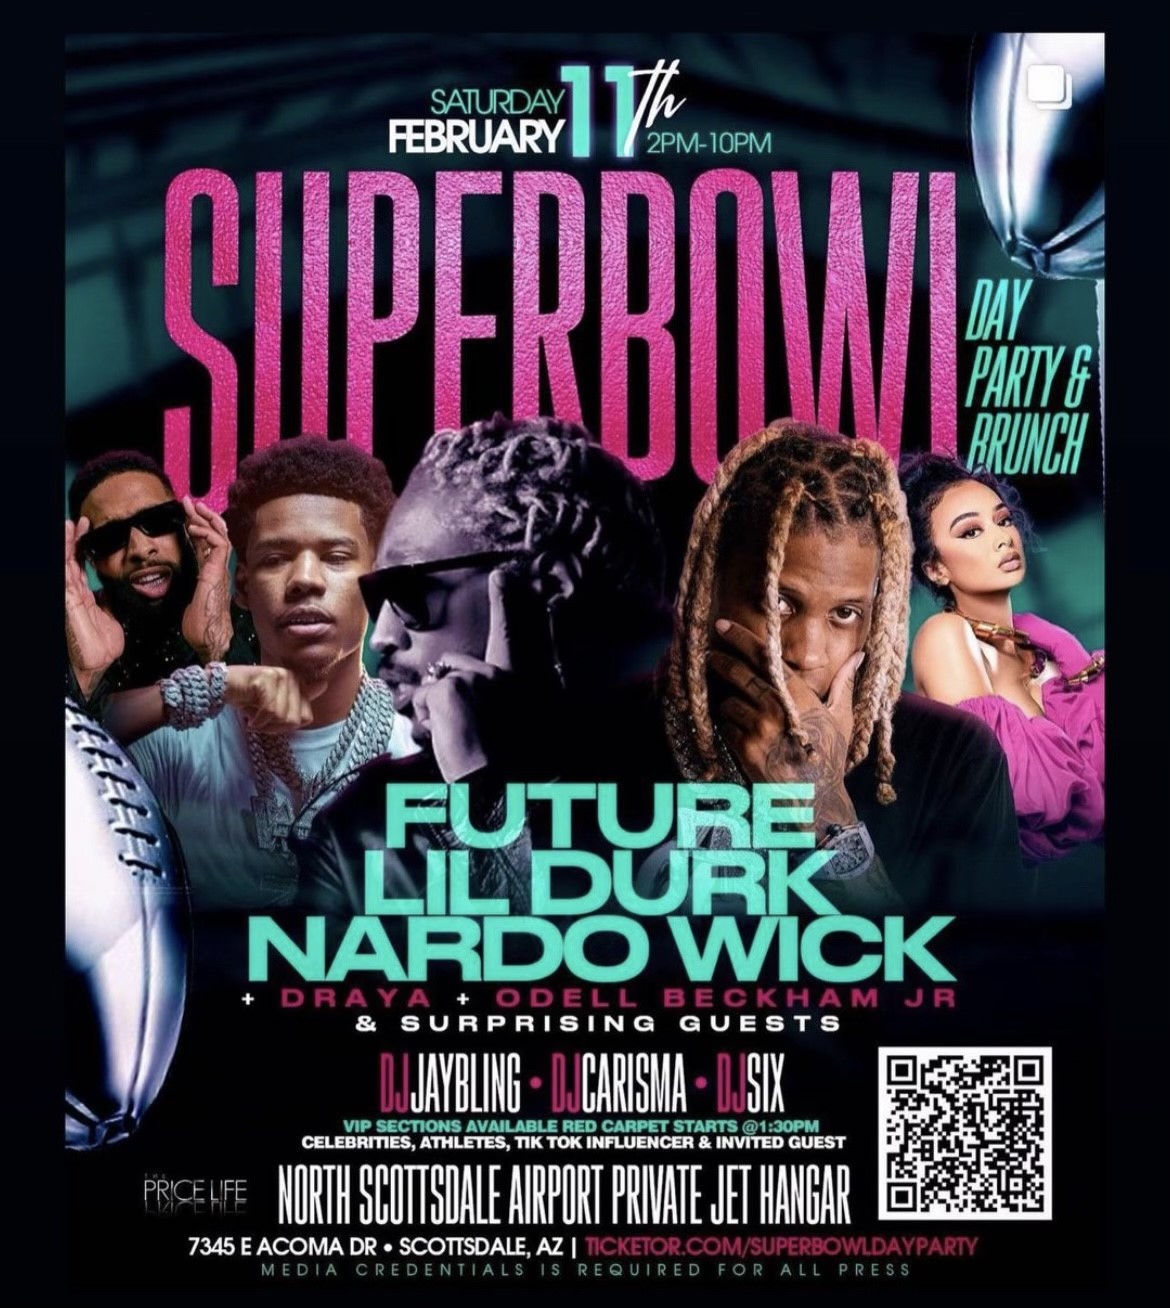 Future/Durk/Nardio  on Feb 11, 14:00@North Scottsdale Airport - Buy tickets and Get information on 5starfoster inc 